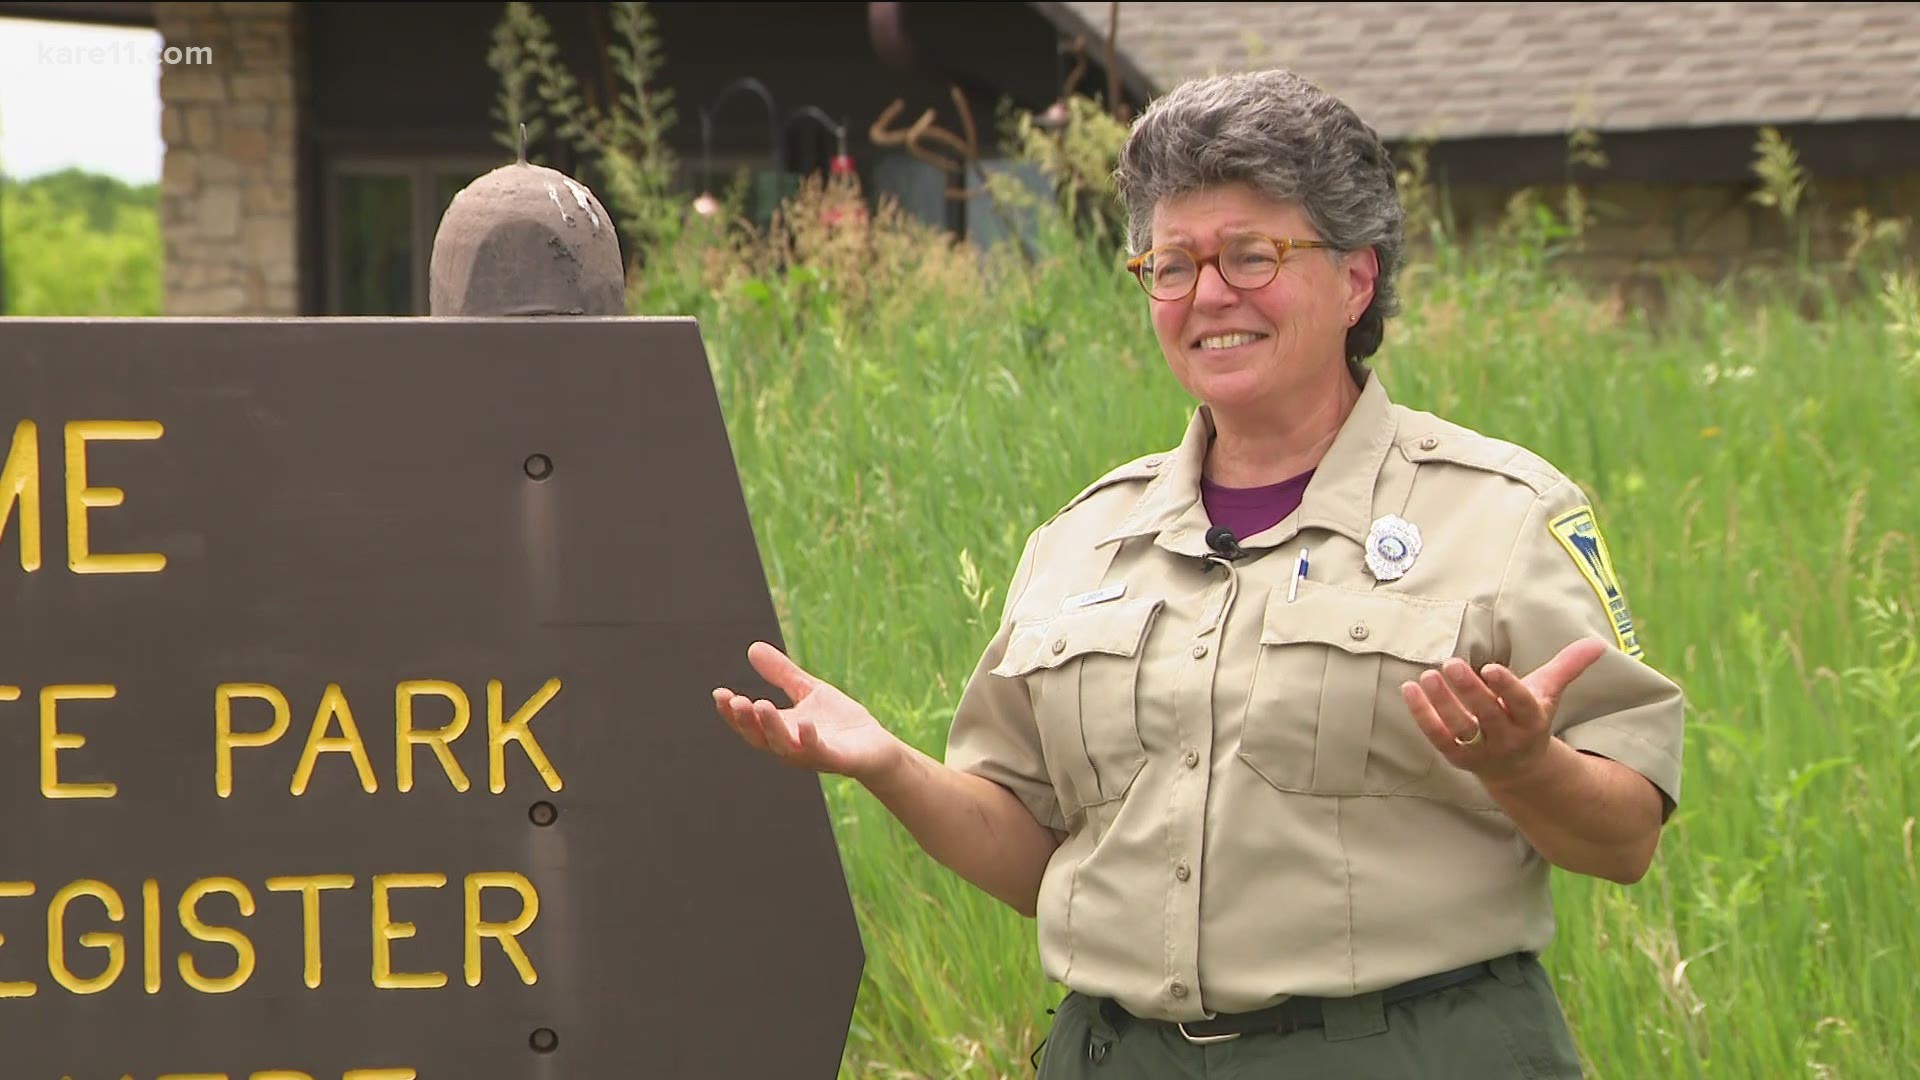 Saturday, June 12 is one of a handful of days across the year where visitors can enjoy free state park access across Minnesota.